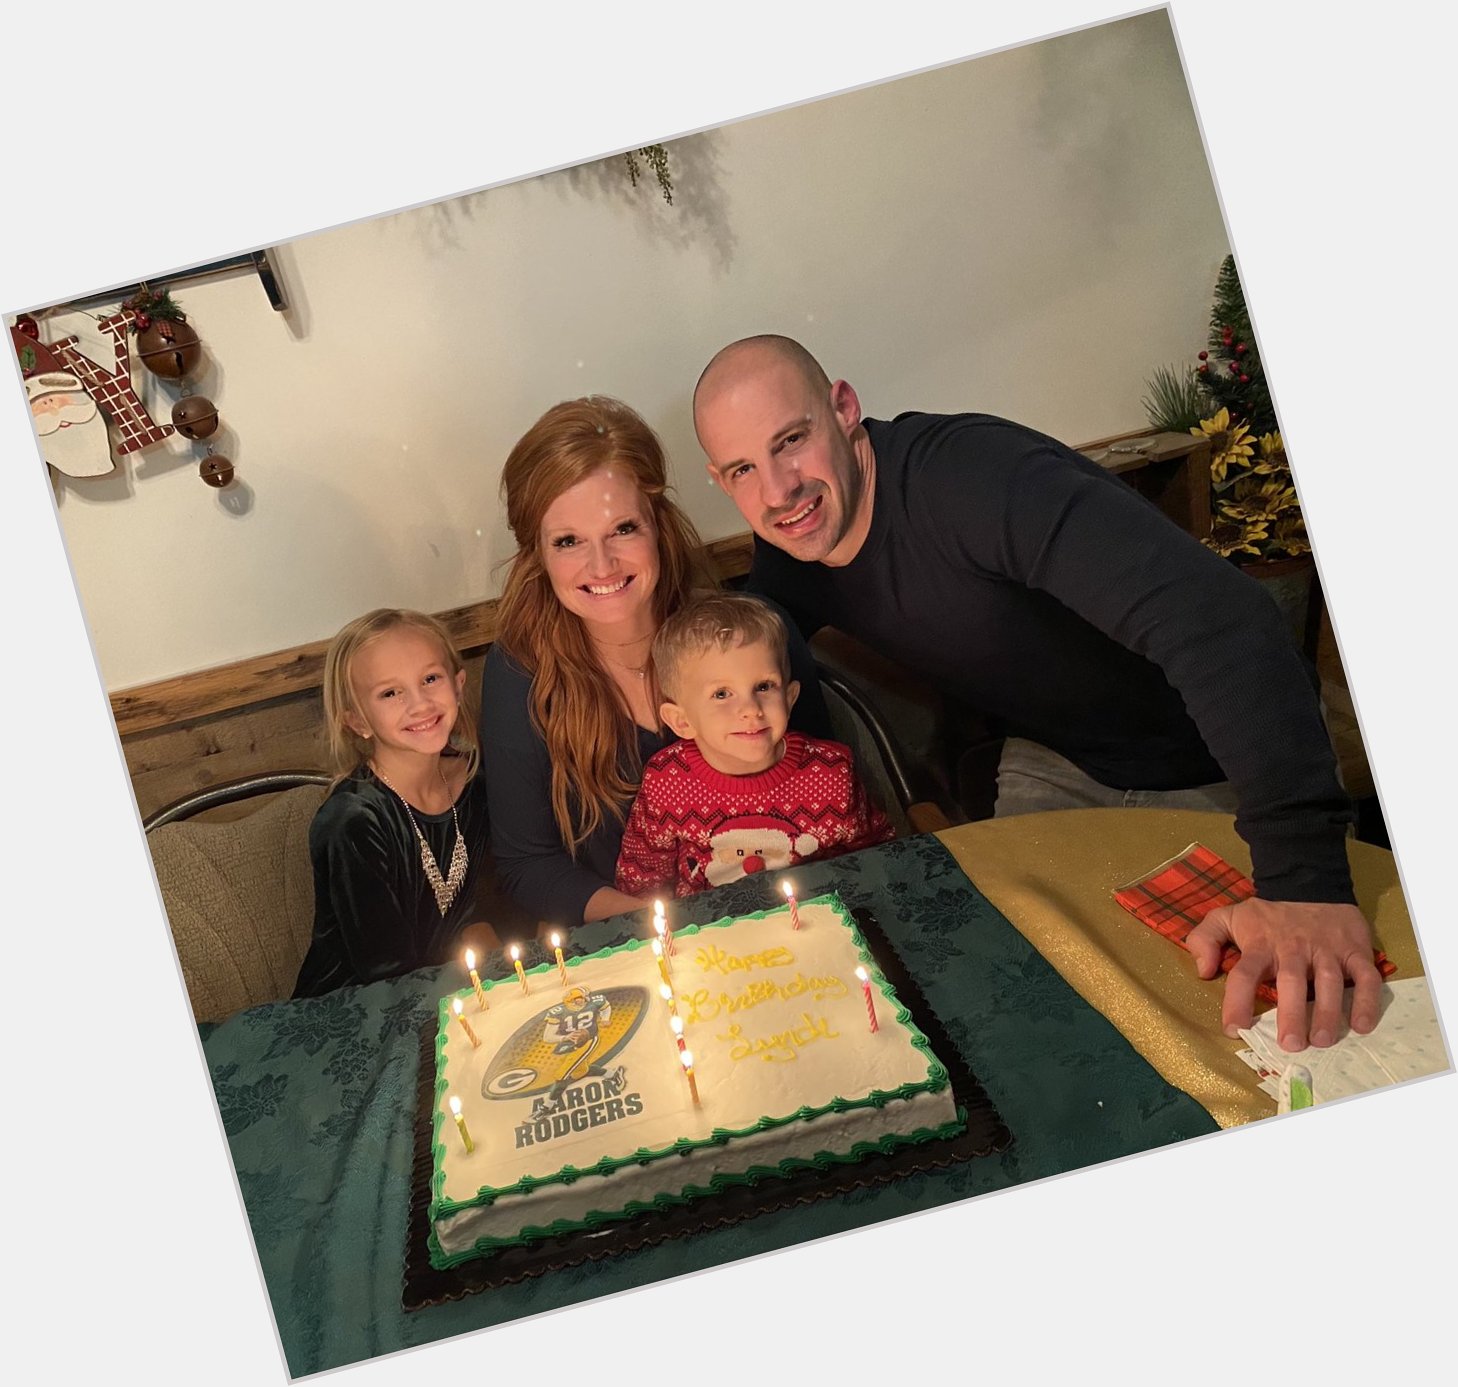 Happy birthday Lyndi.  Who else but Aaron Rodgers on your cake?       